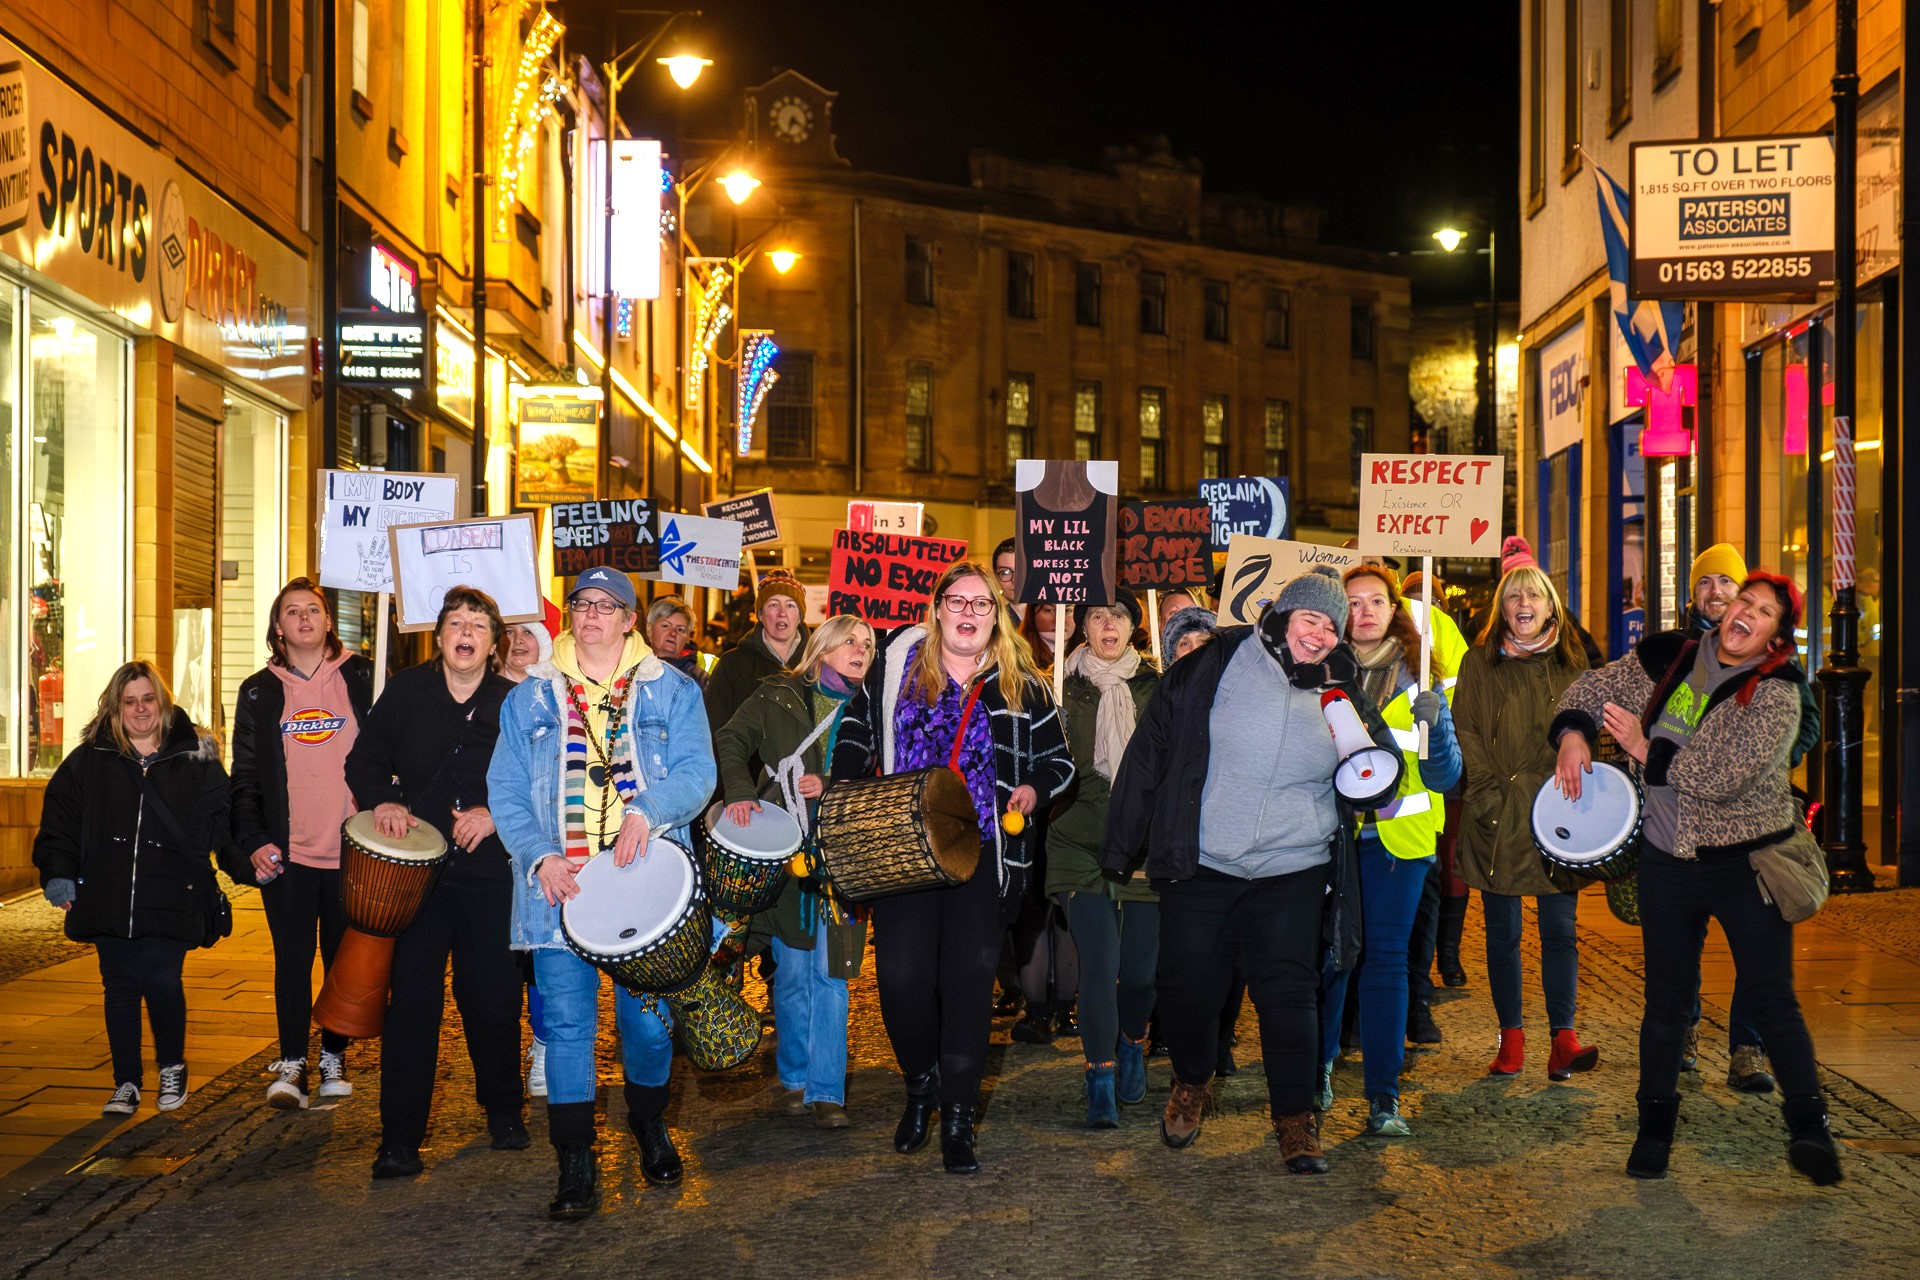 Attendees at our Reclaim the Night walk